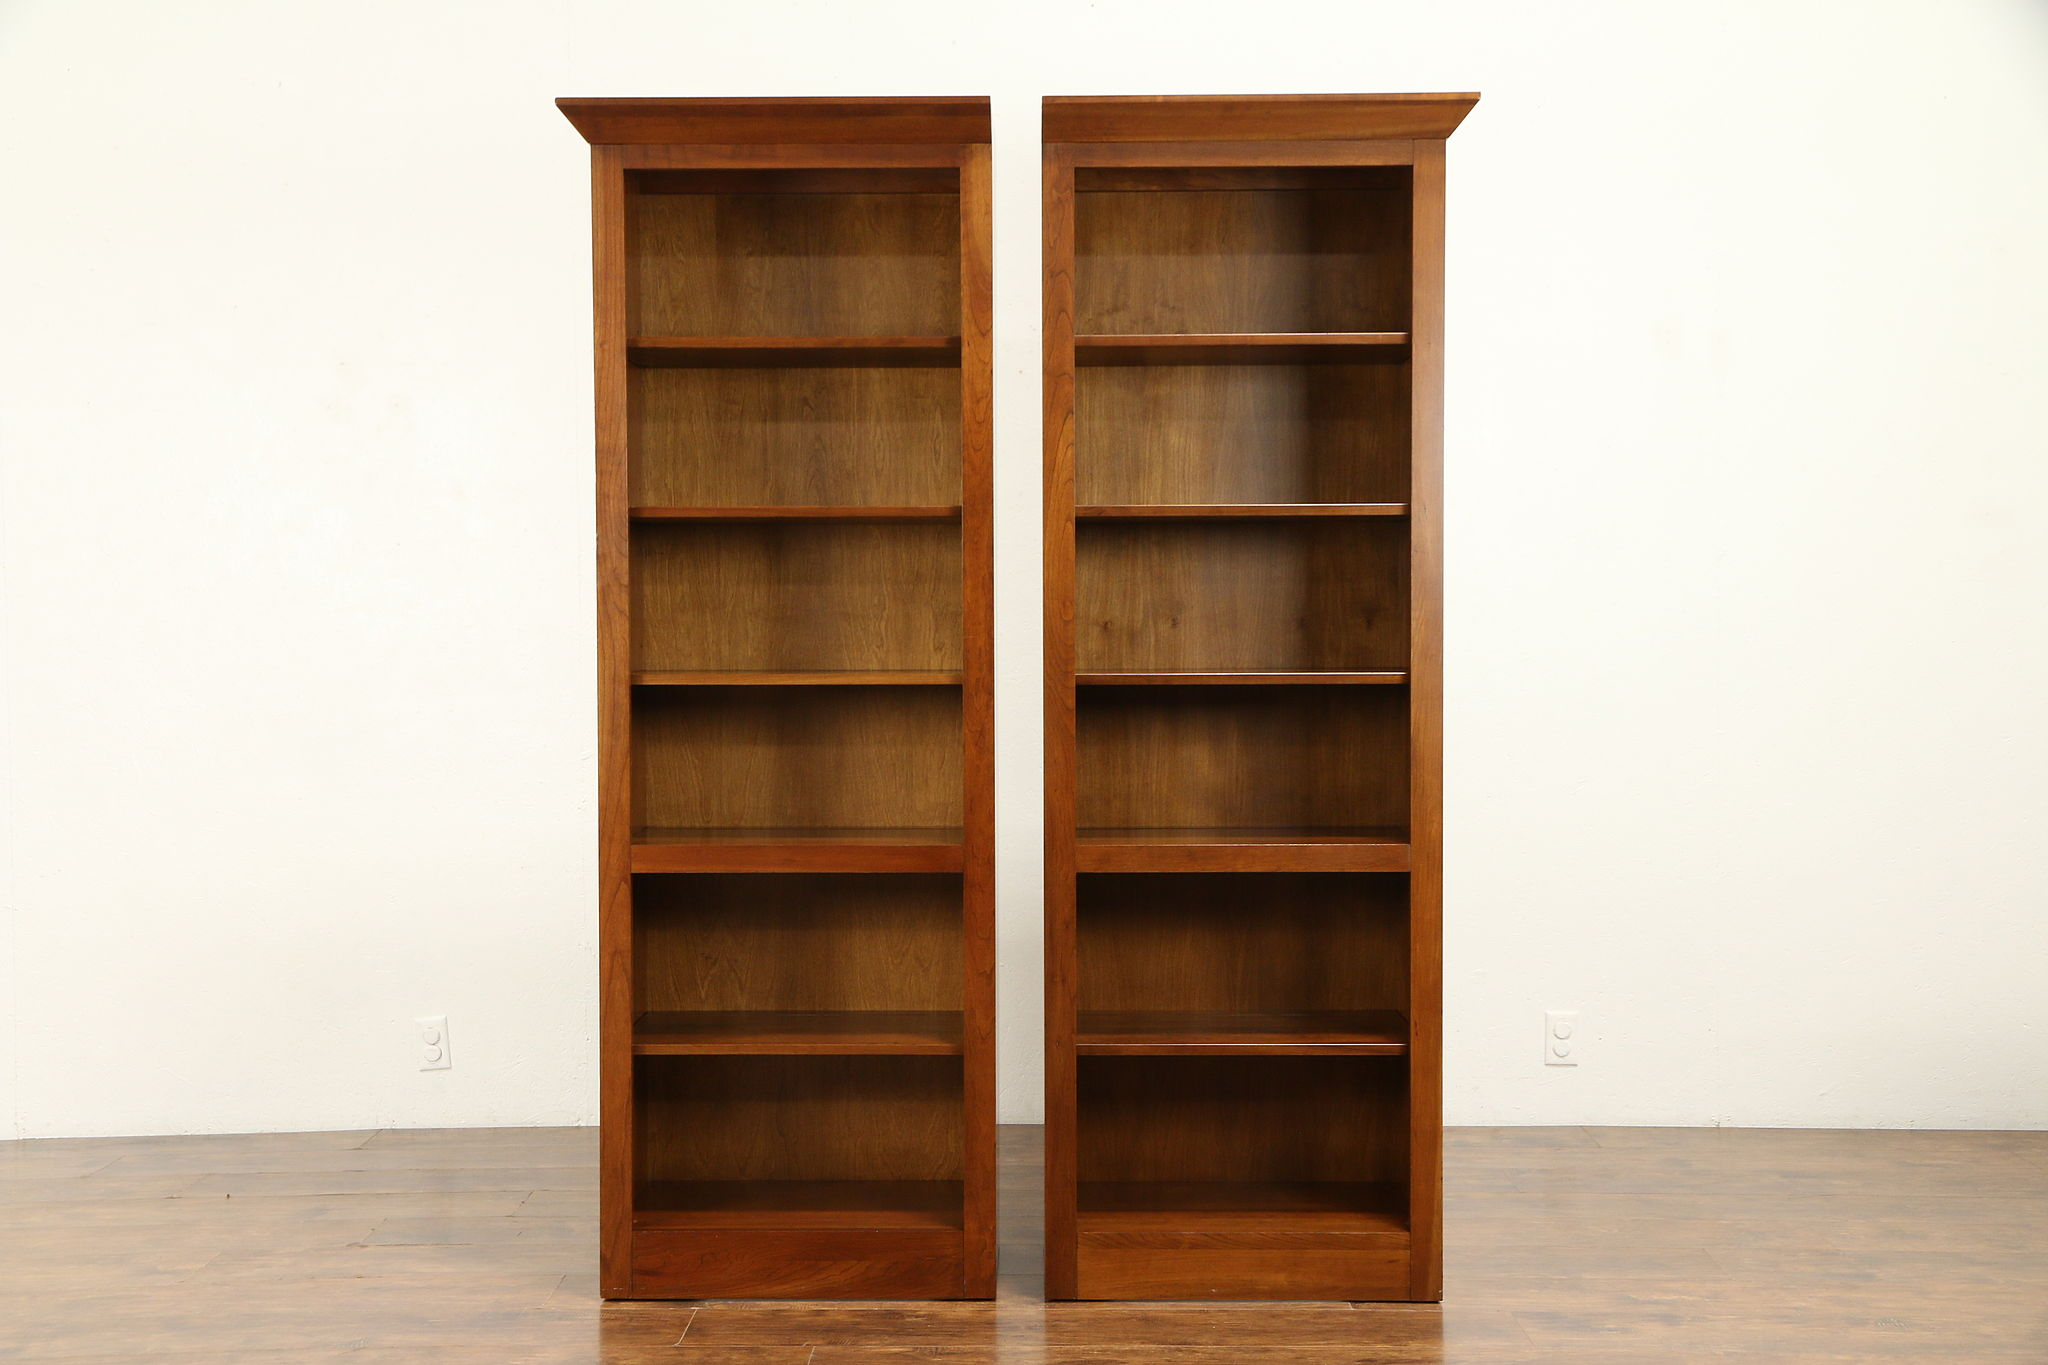 Ethan Allen Cherry Vintage Double Bookcase Display Cabinet 30891 intended for size 2048 X 1365